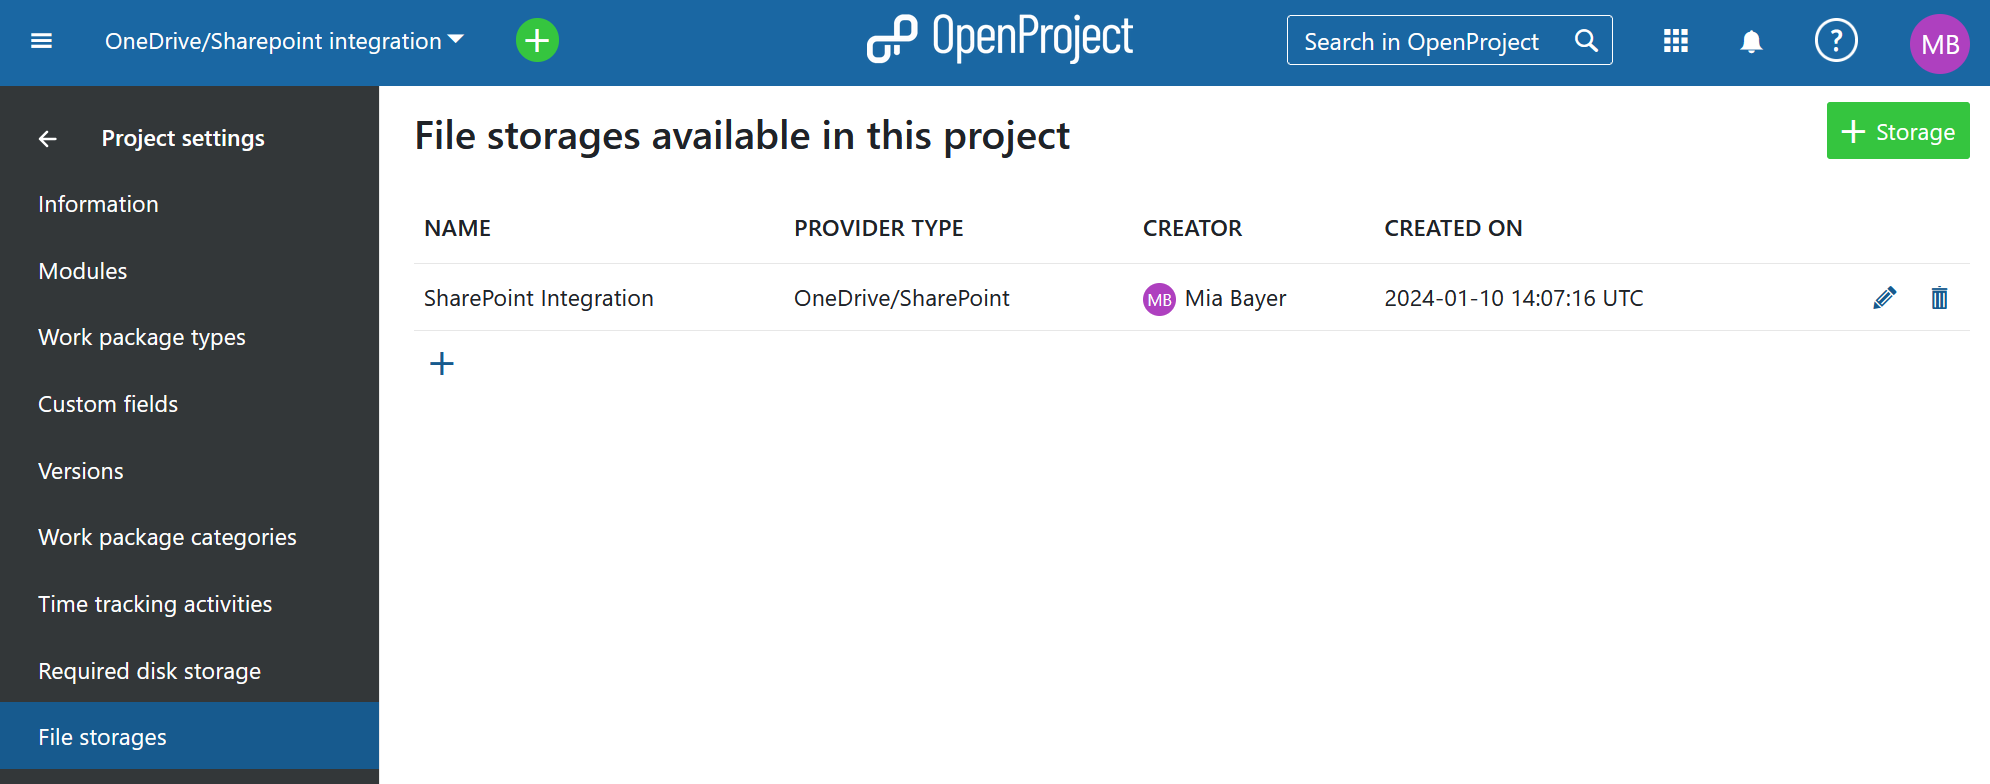 SharePoint/OneDrive file storage is added to an OpenProject project